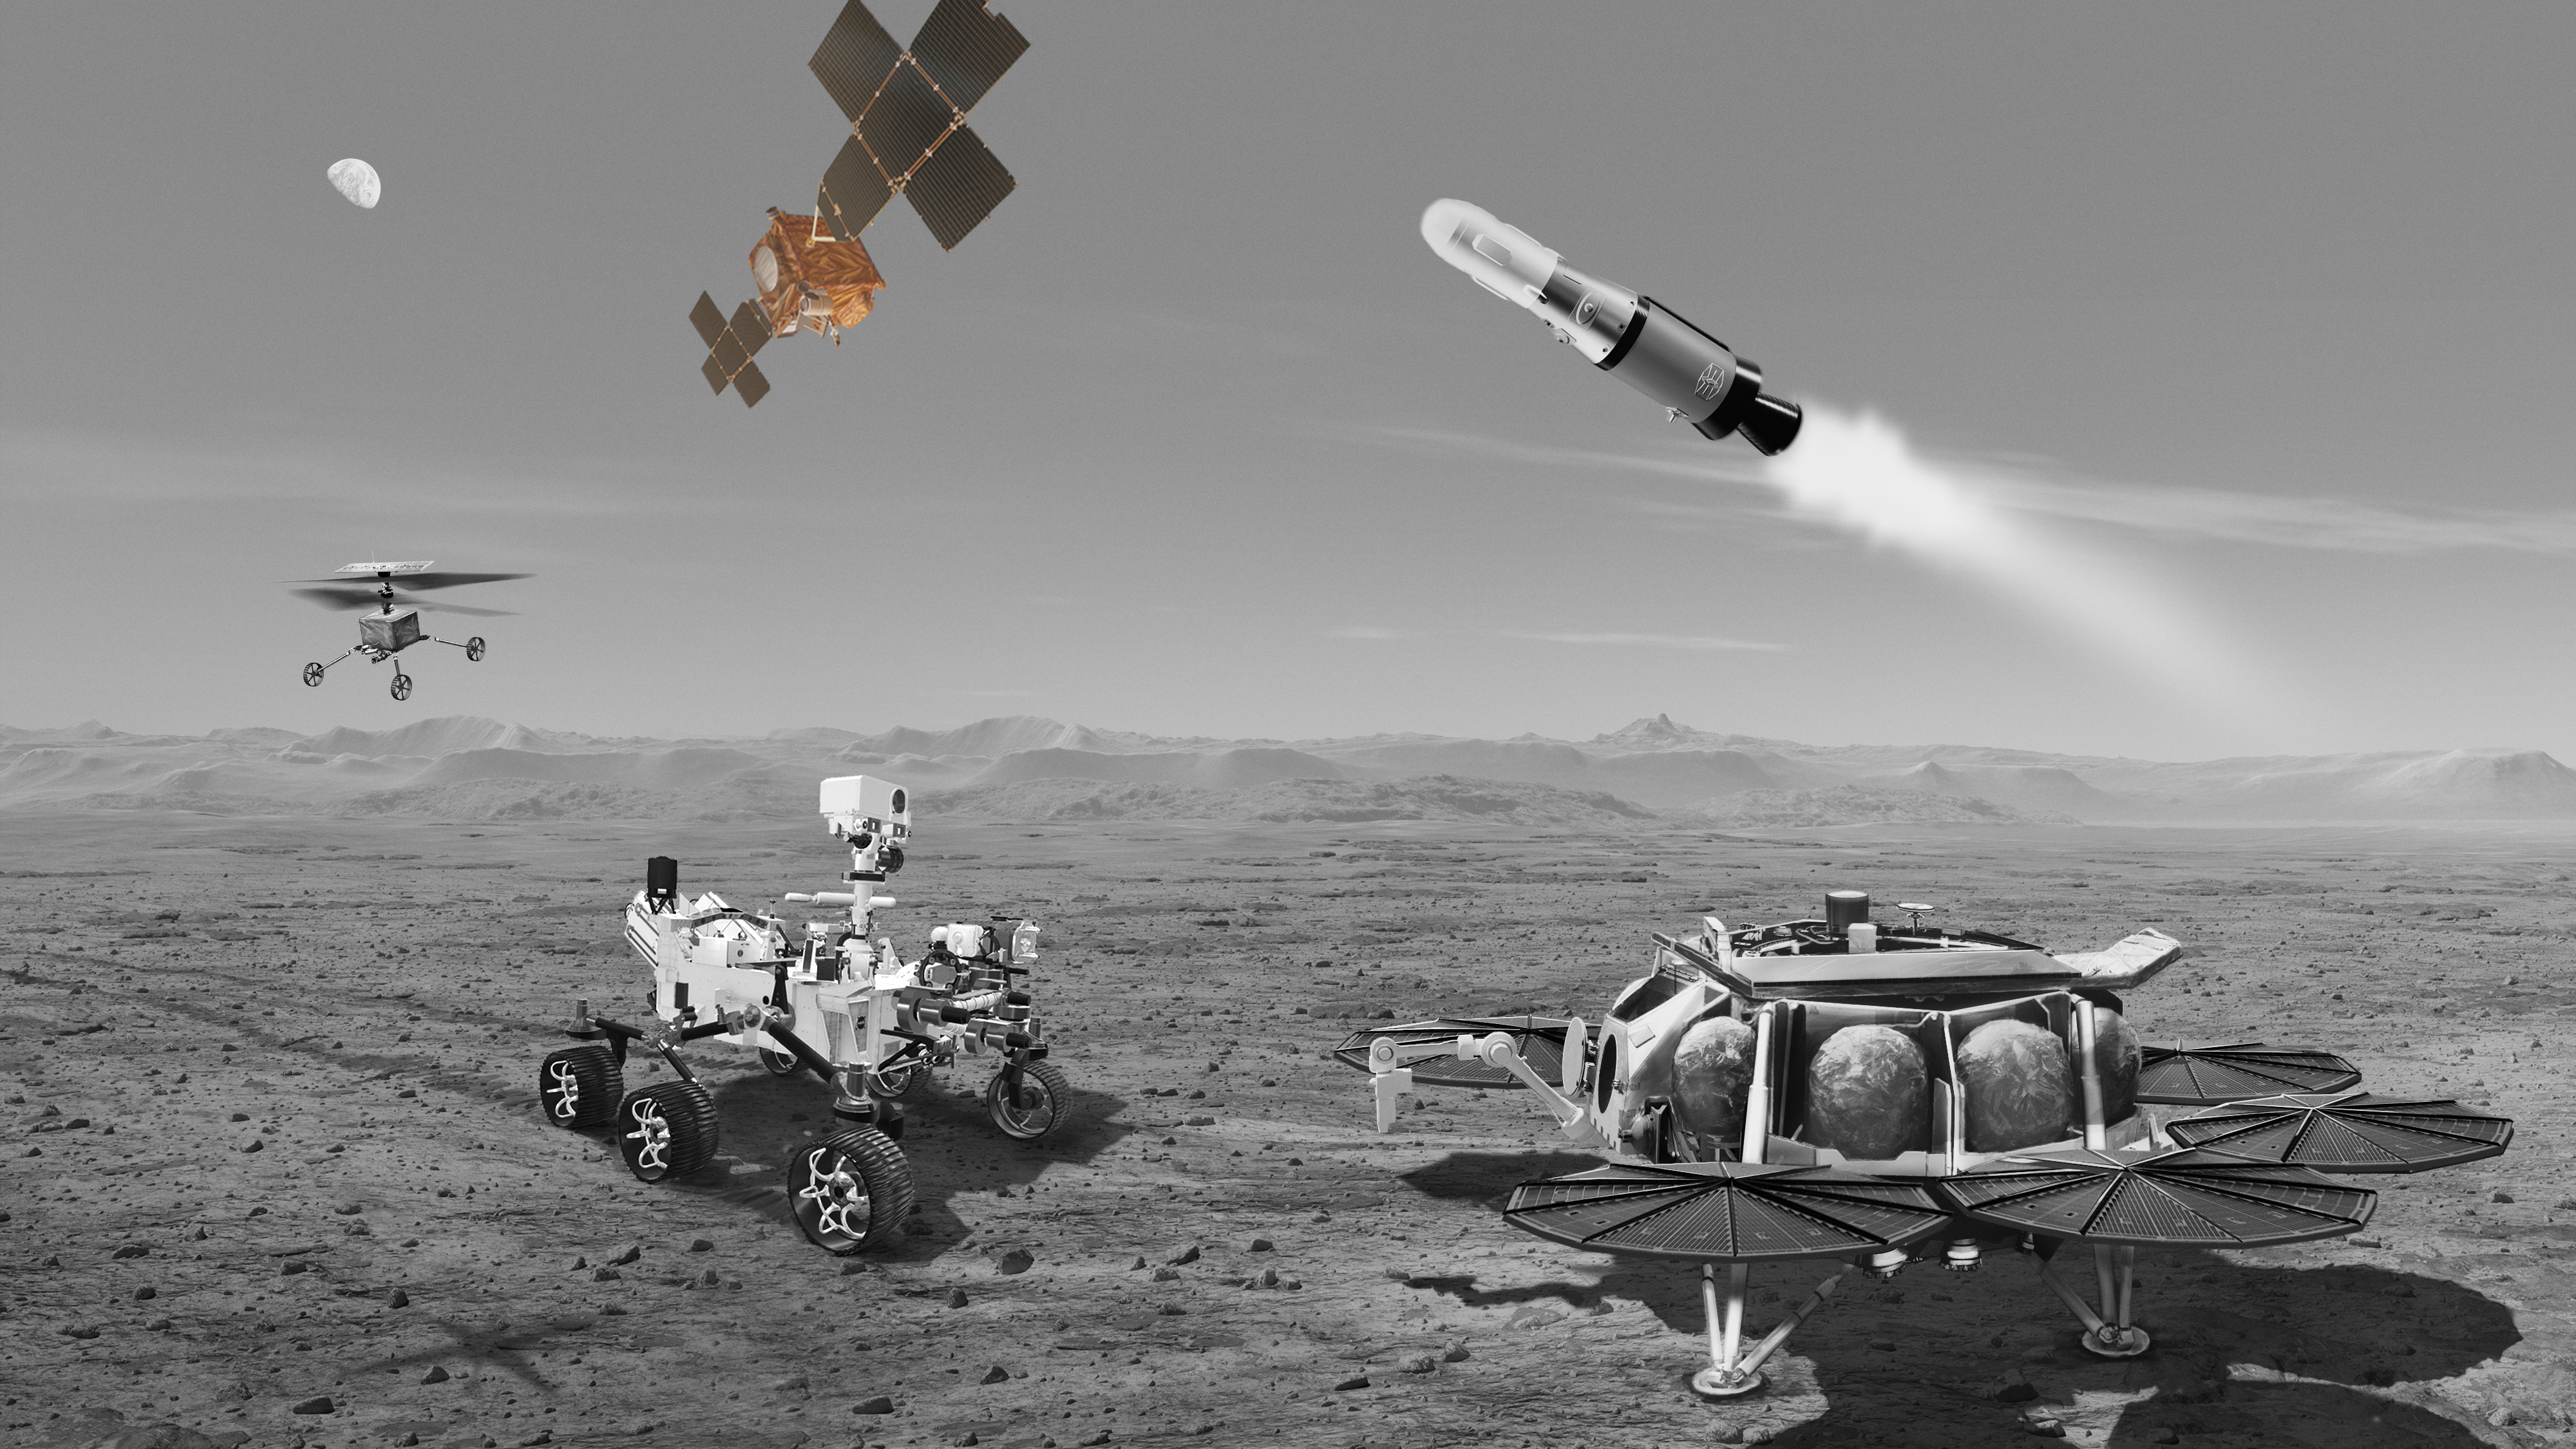 This artist's view shows the five spacecraft involved in Mars Sample Return - a rover, orbiter, lander, rocket, and small helicopters. The Earth Return Orbiter is highlighted in this image.